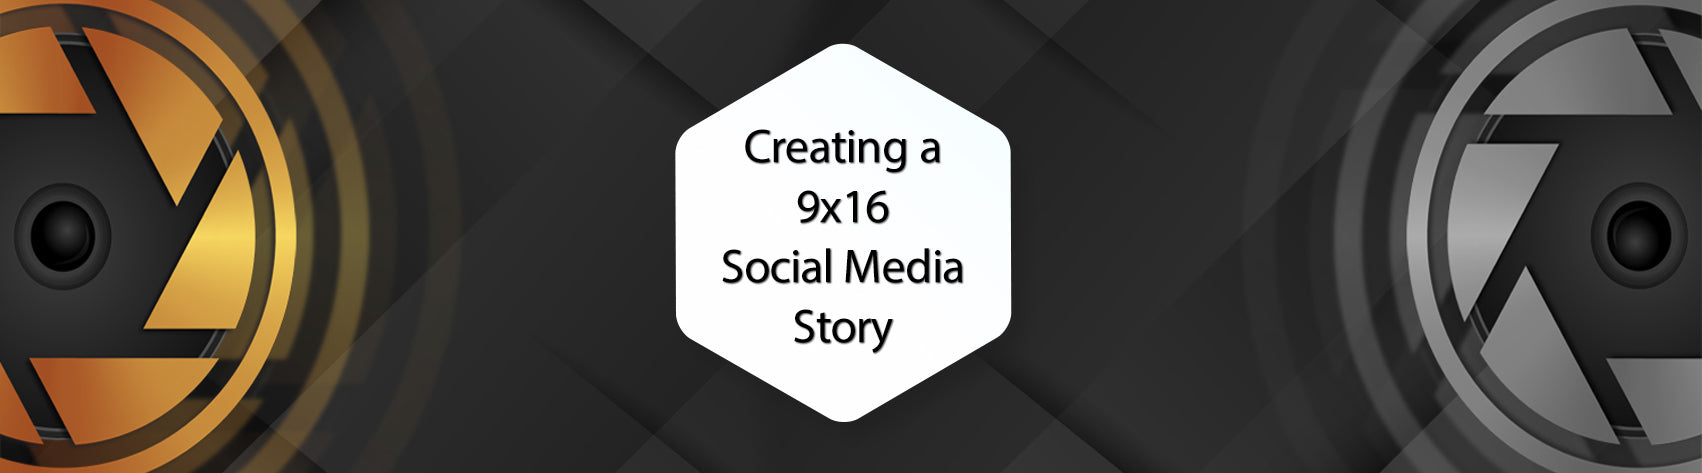 How to use Photopia to create a 9x16 Social Media Story